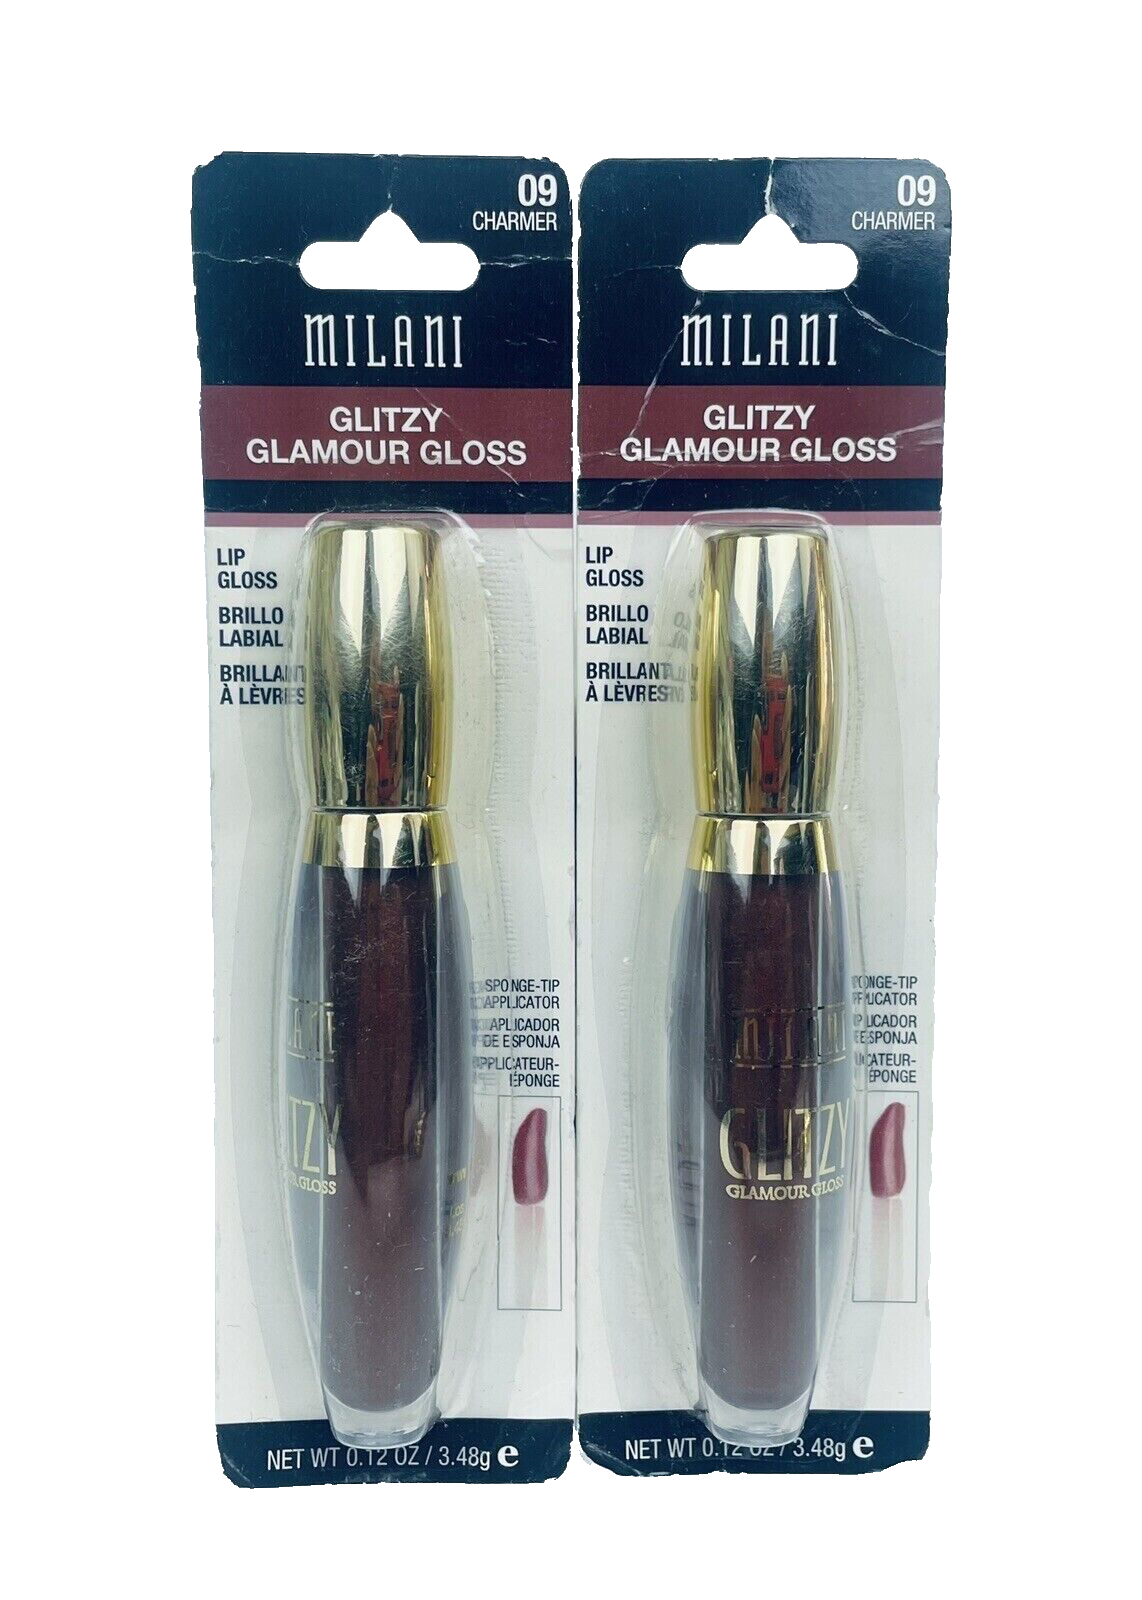 Milani Glitzy Glamour Gloss #09 Charmer  With Box / sealed LOT OF 3  BRAND NEW - $15.19